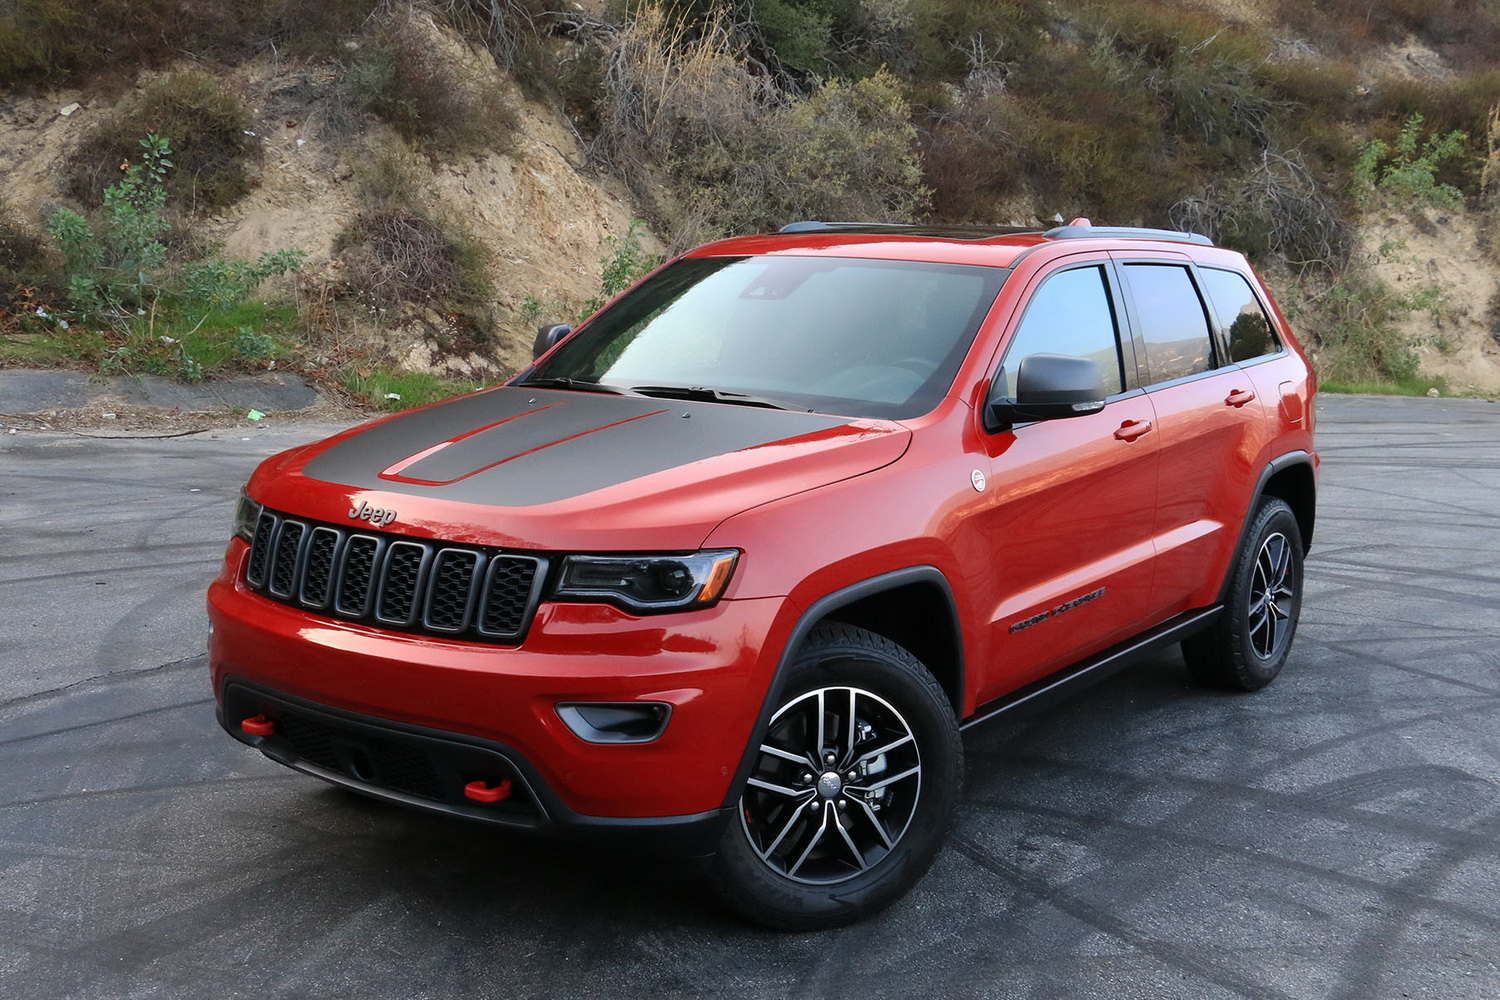 2017 Jeep Grand Cherokee Trailhawk Review | Digital Trends